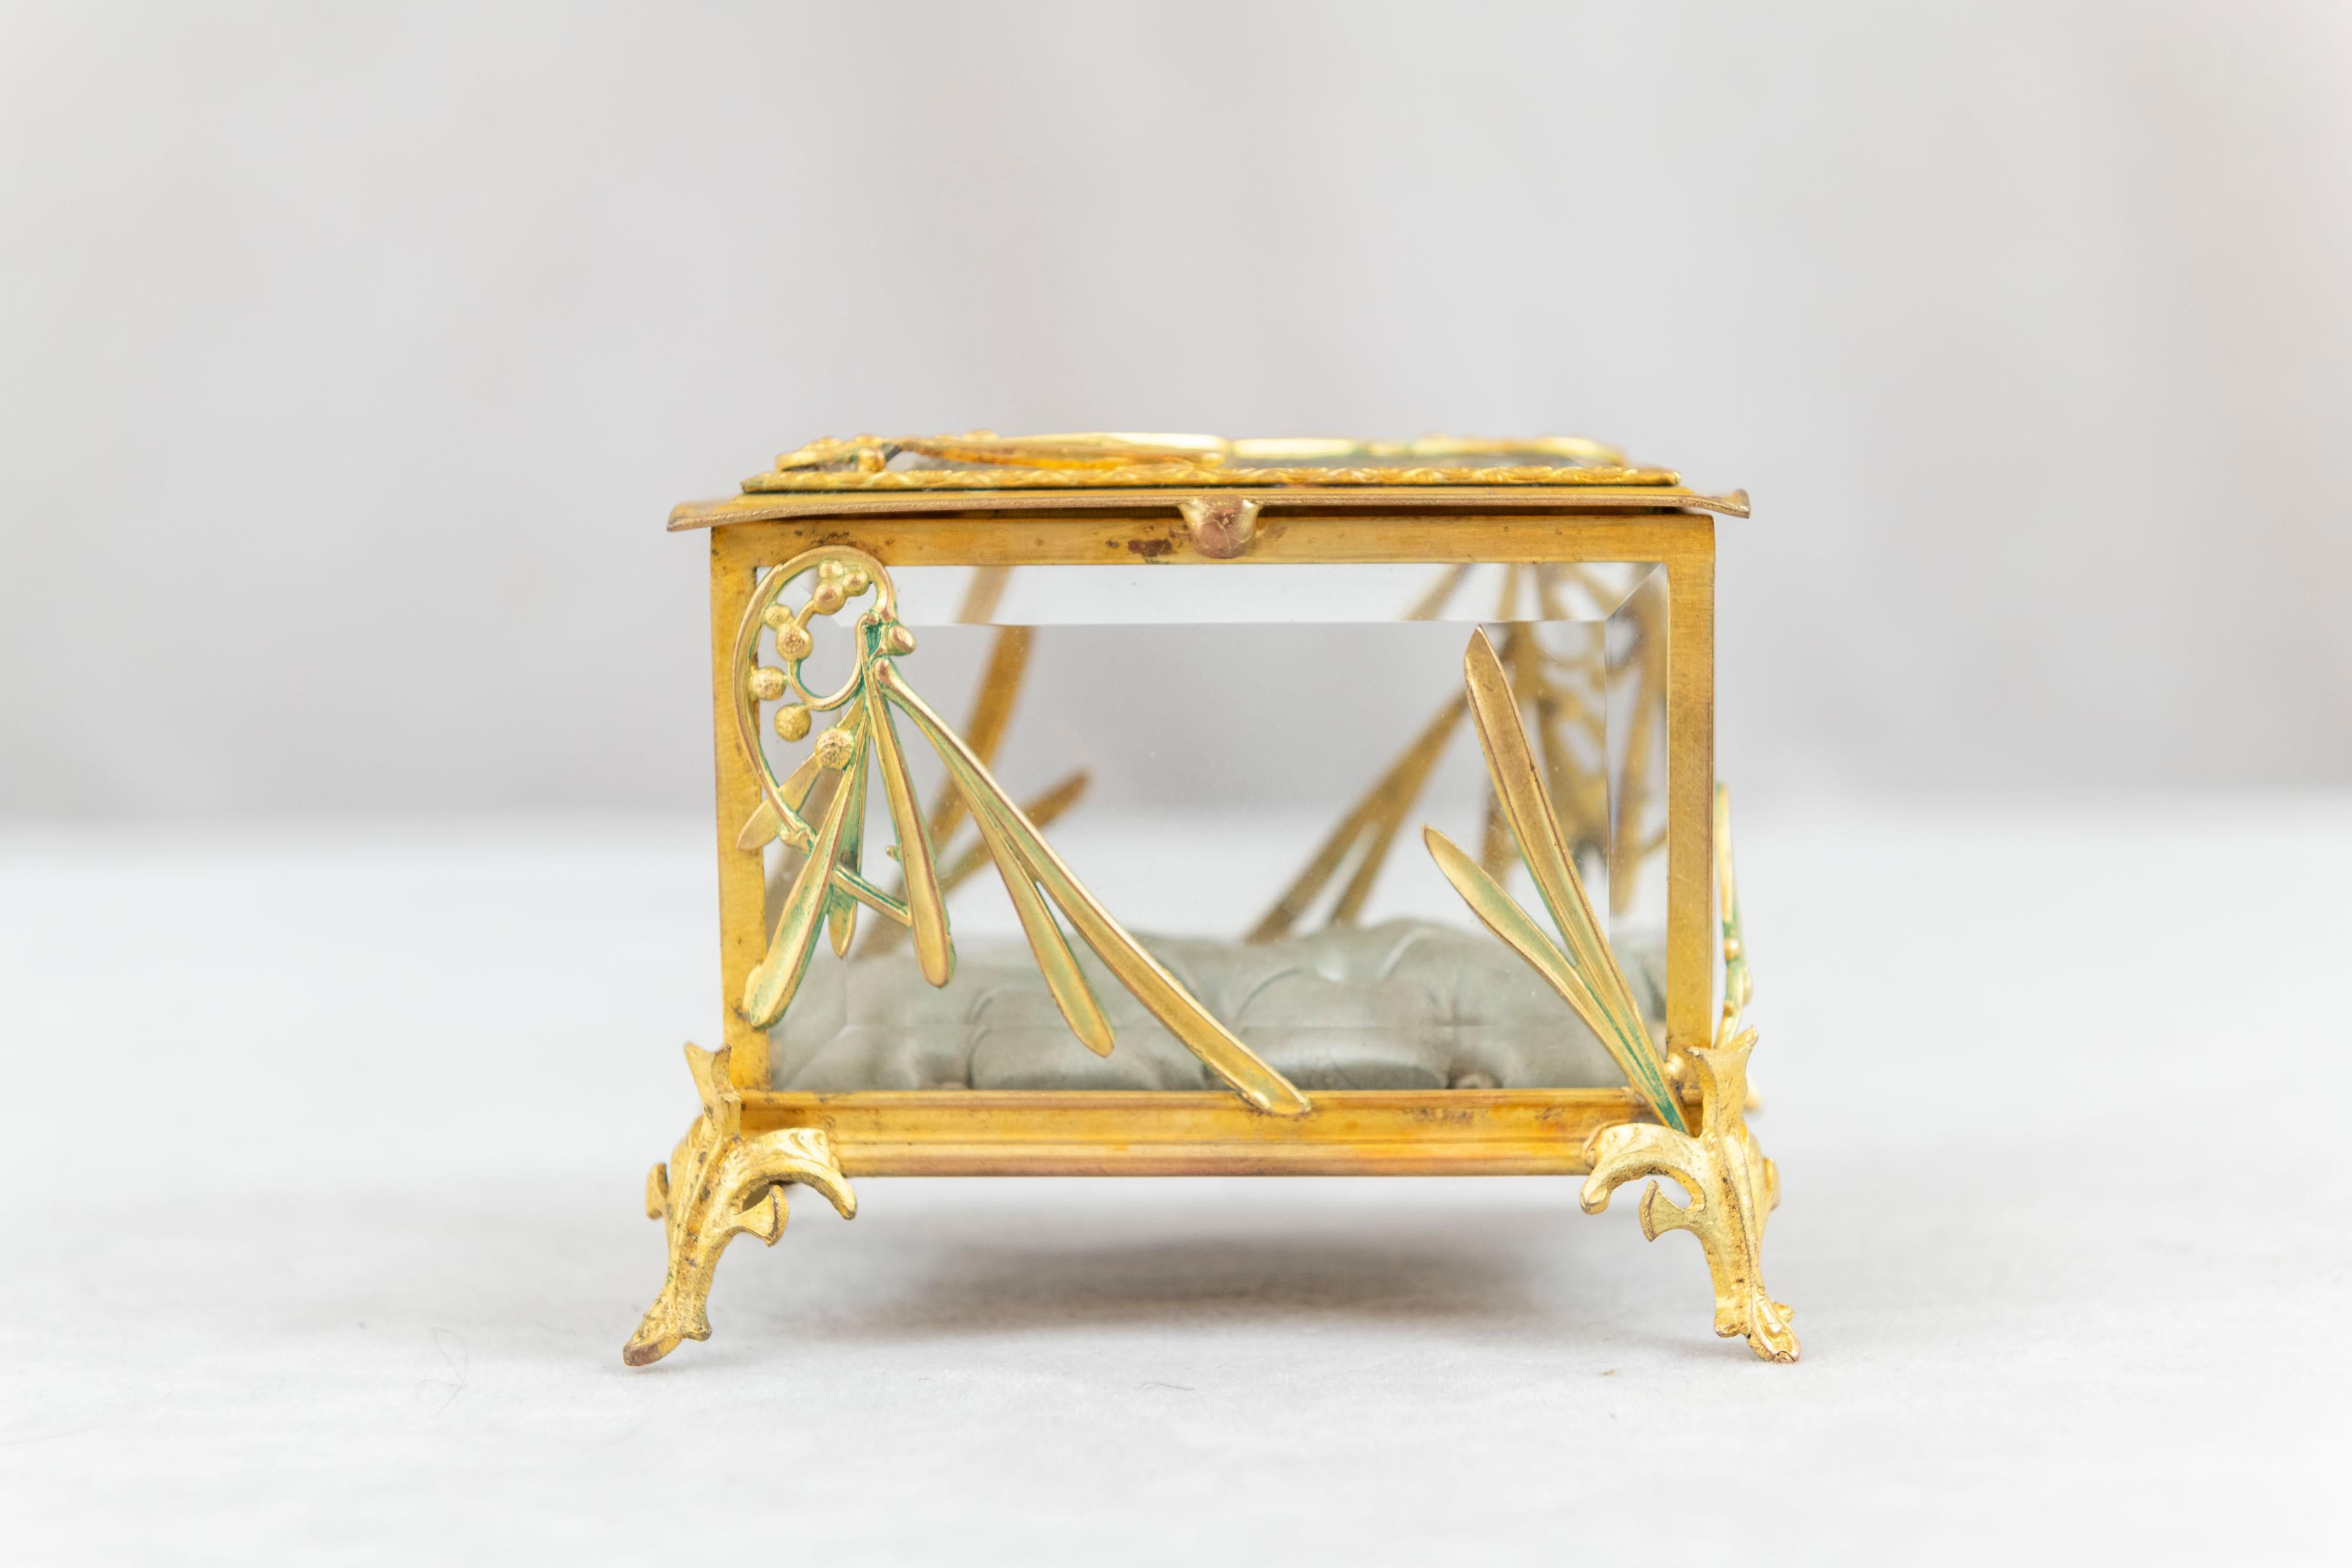  A very high quality art nouveau French gilt bronze ring box. All the glass is beveled and the inside is tufted silk. A striking and rare little item. A perfect gift for the engagement ring, or good for any occasion. A very special gift.